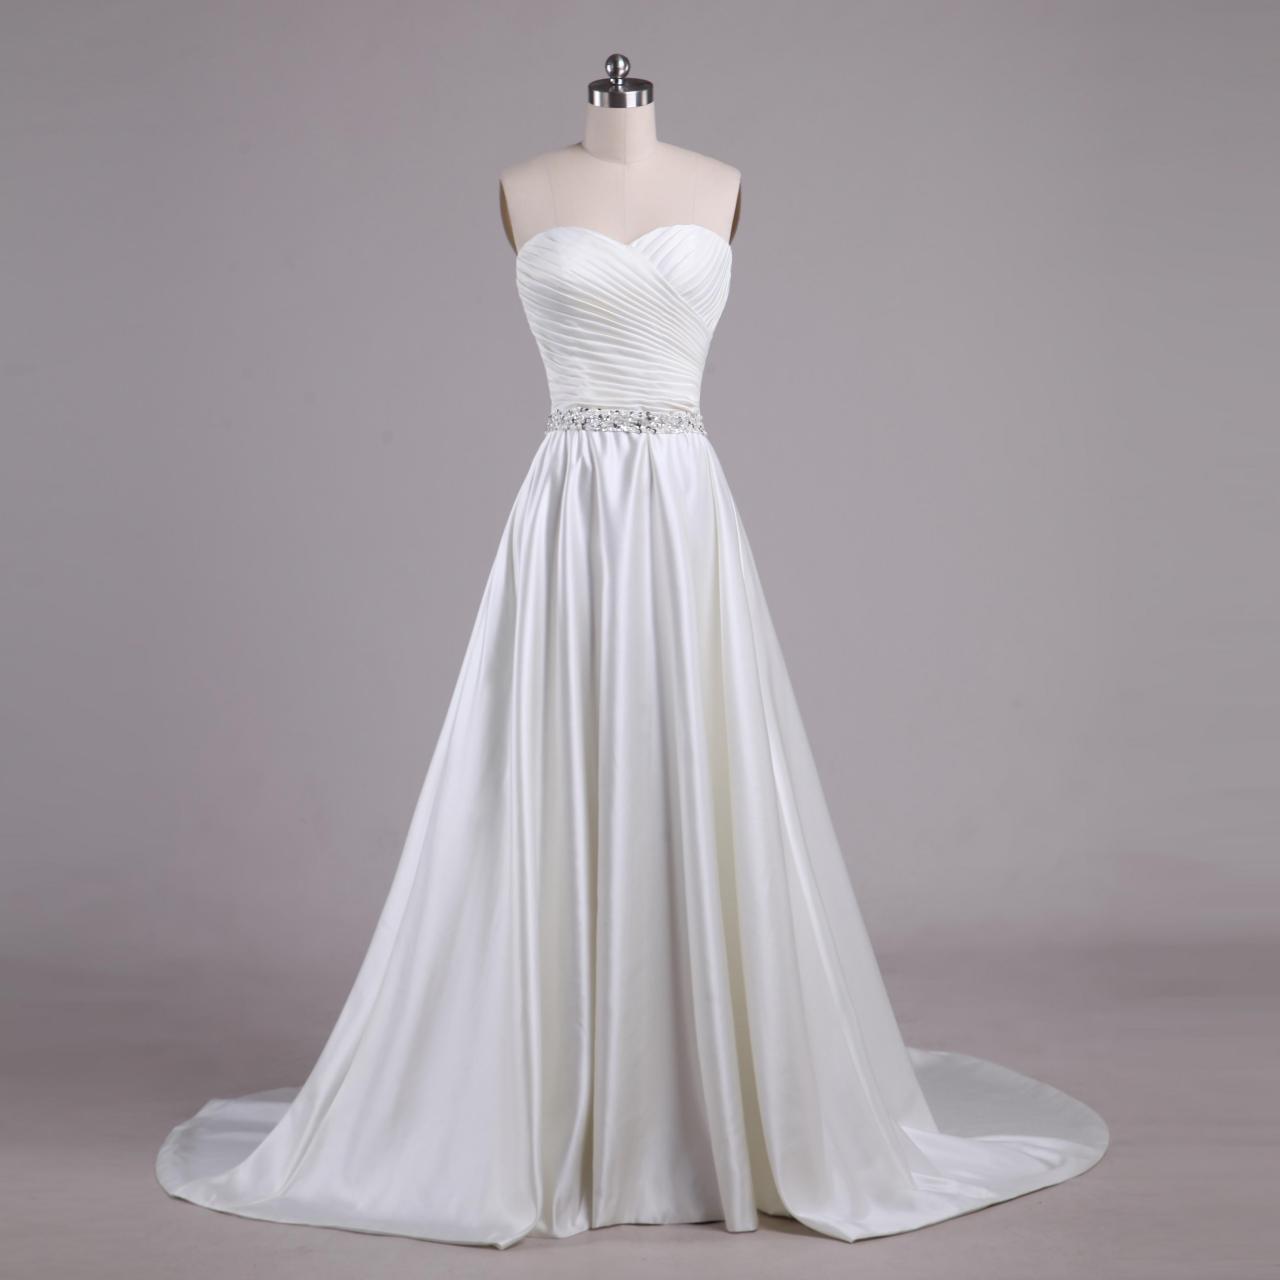 Satin Sweetheart Floor Length A-line Wedding Dress Featuring Sweep Train And Beaded Embellished Belt